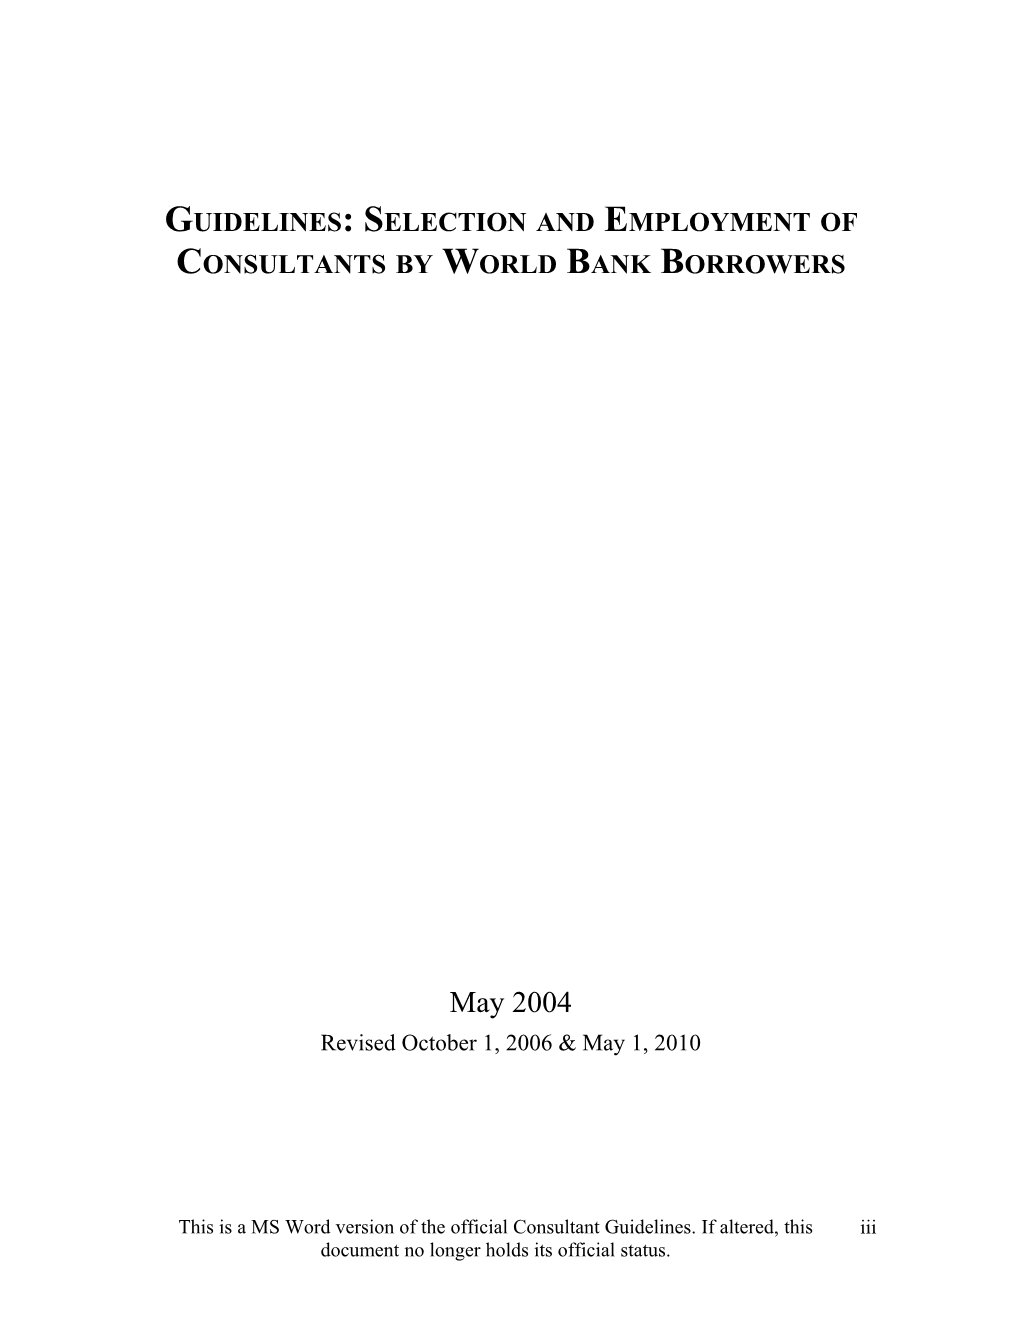 Guidelines: Selection and Employment of Consultants by World Bank Borrowers